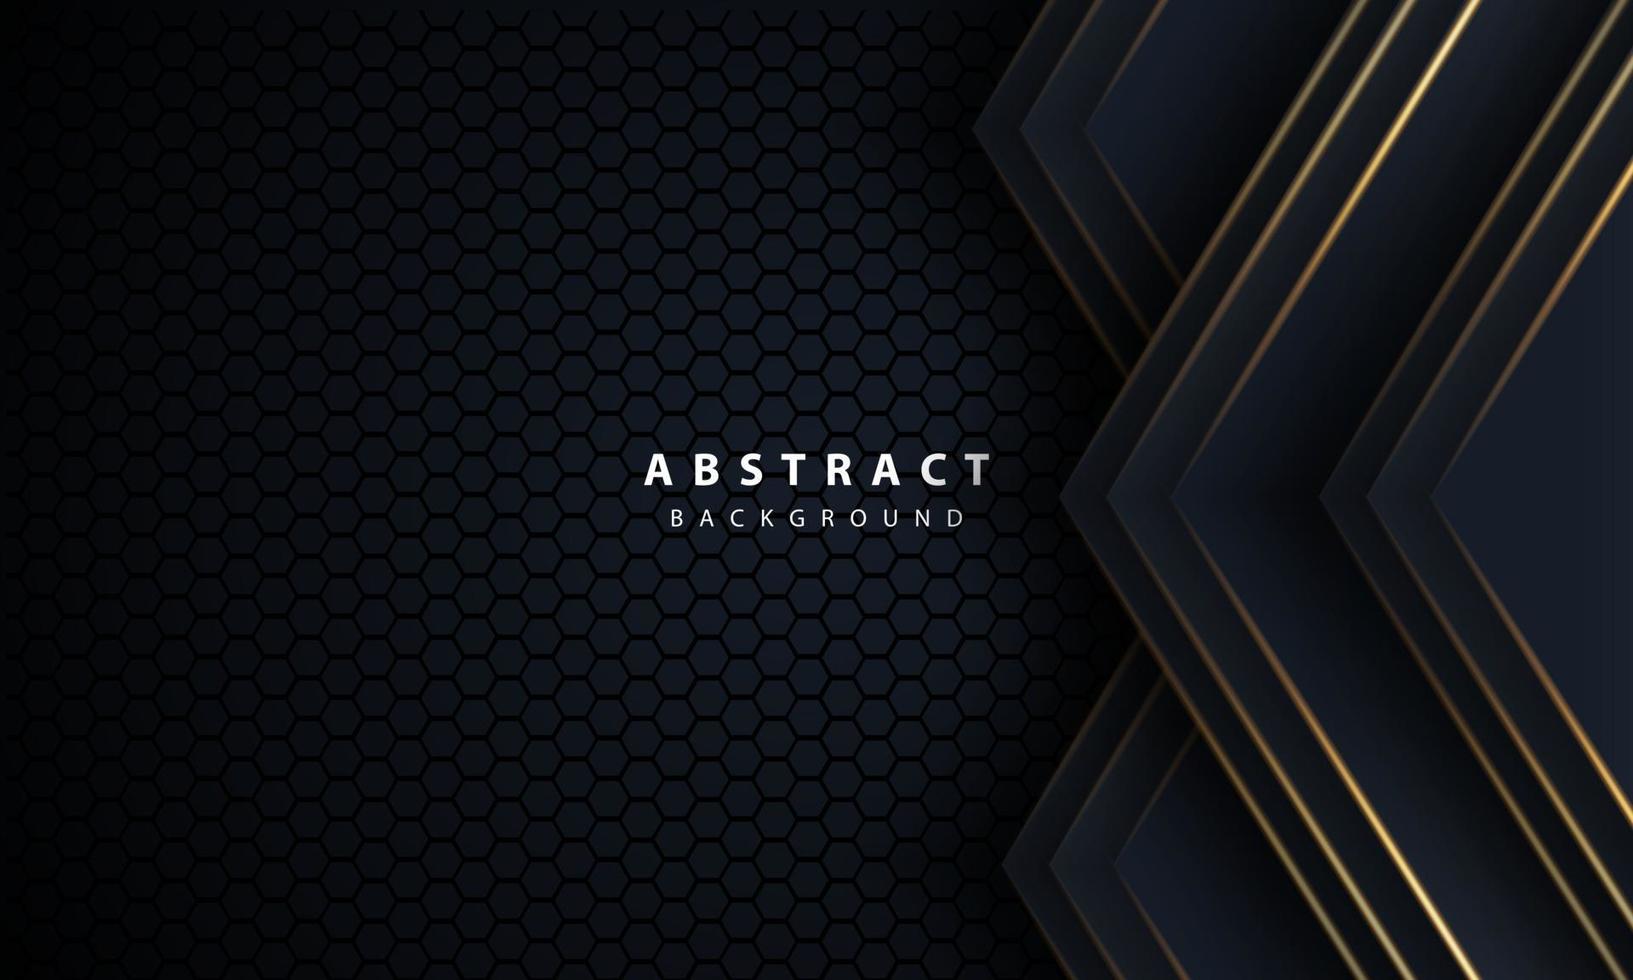 Abstract gold line arrow on black with hexagon mesh design modern luxury futuristic technology background vector illustration.